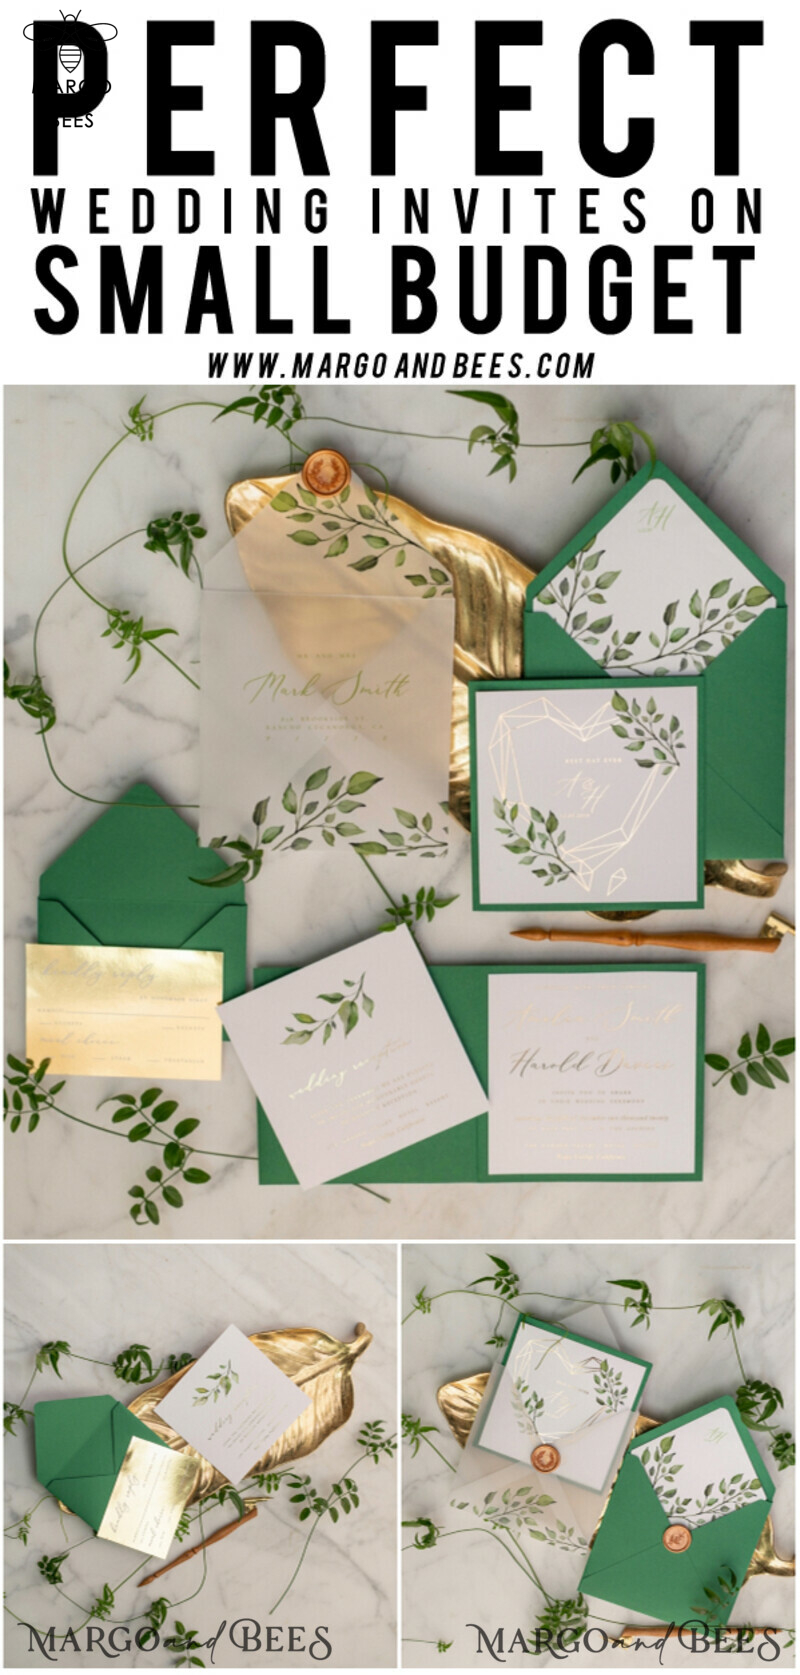 Luxury Gold Foil Wedding Invitations: Elegant Pocketfold Cards with Glamour Greenery and Geometric Vellum Suite-8